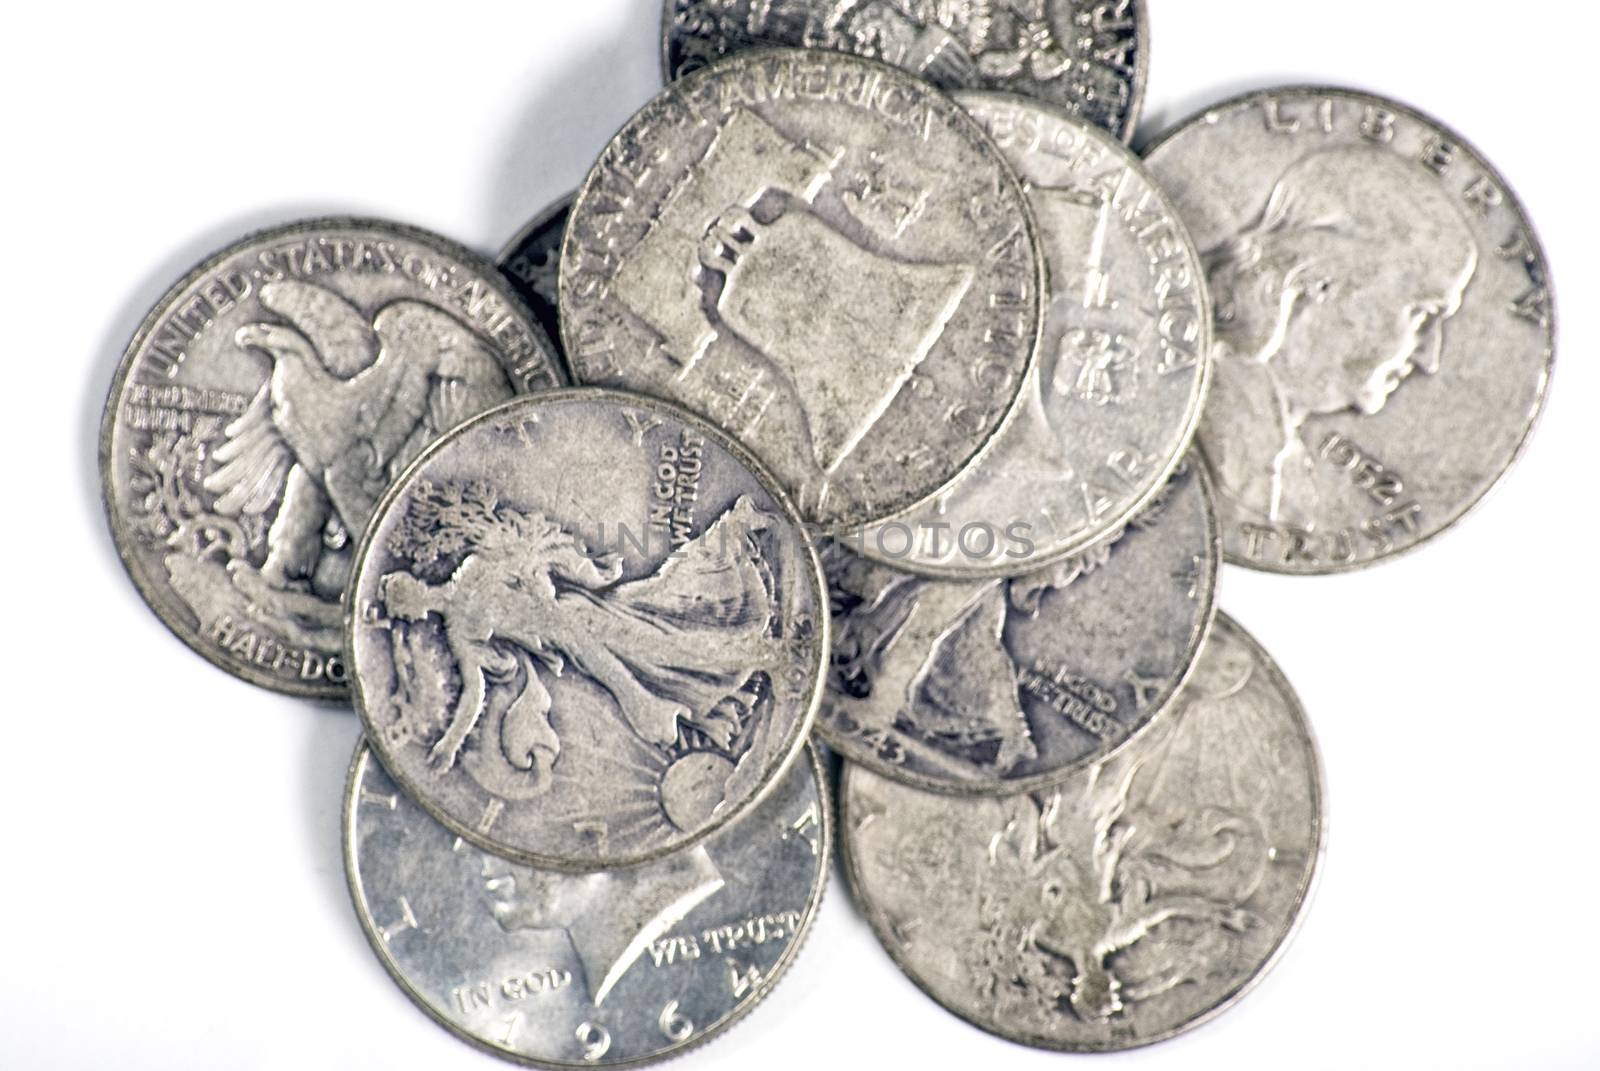 Assorted USA Half-Dollar Coins by rcarner